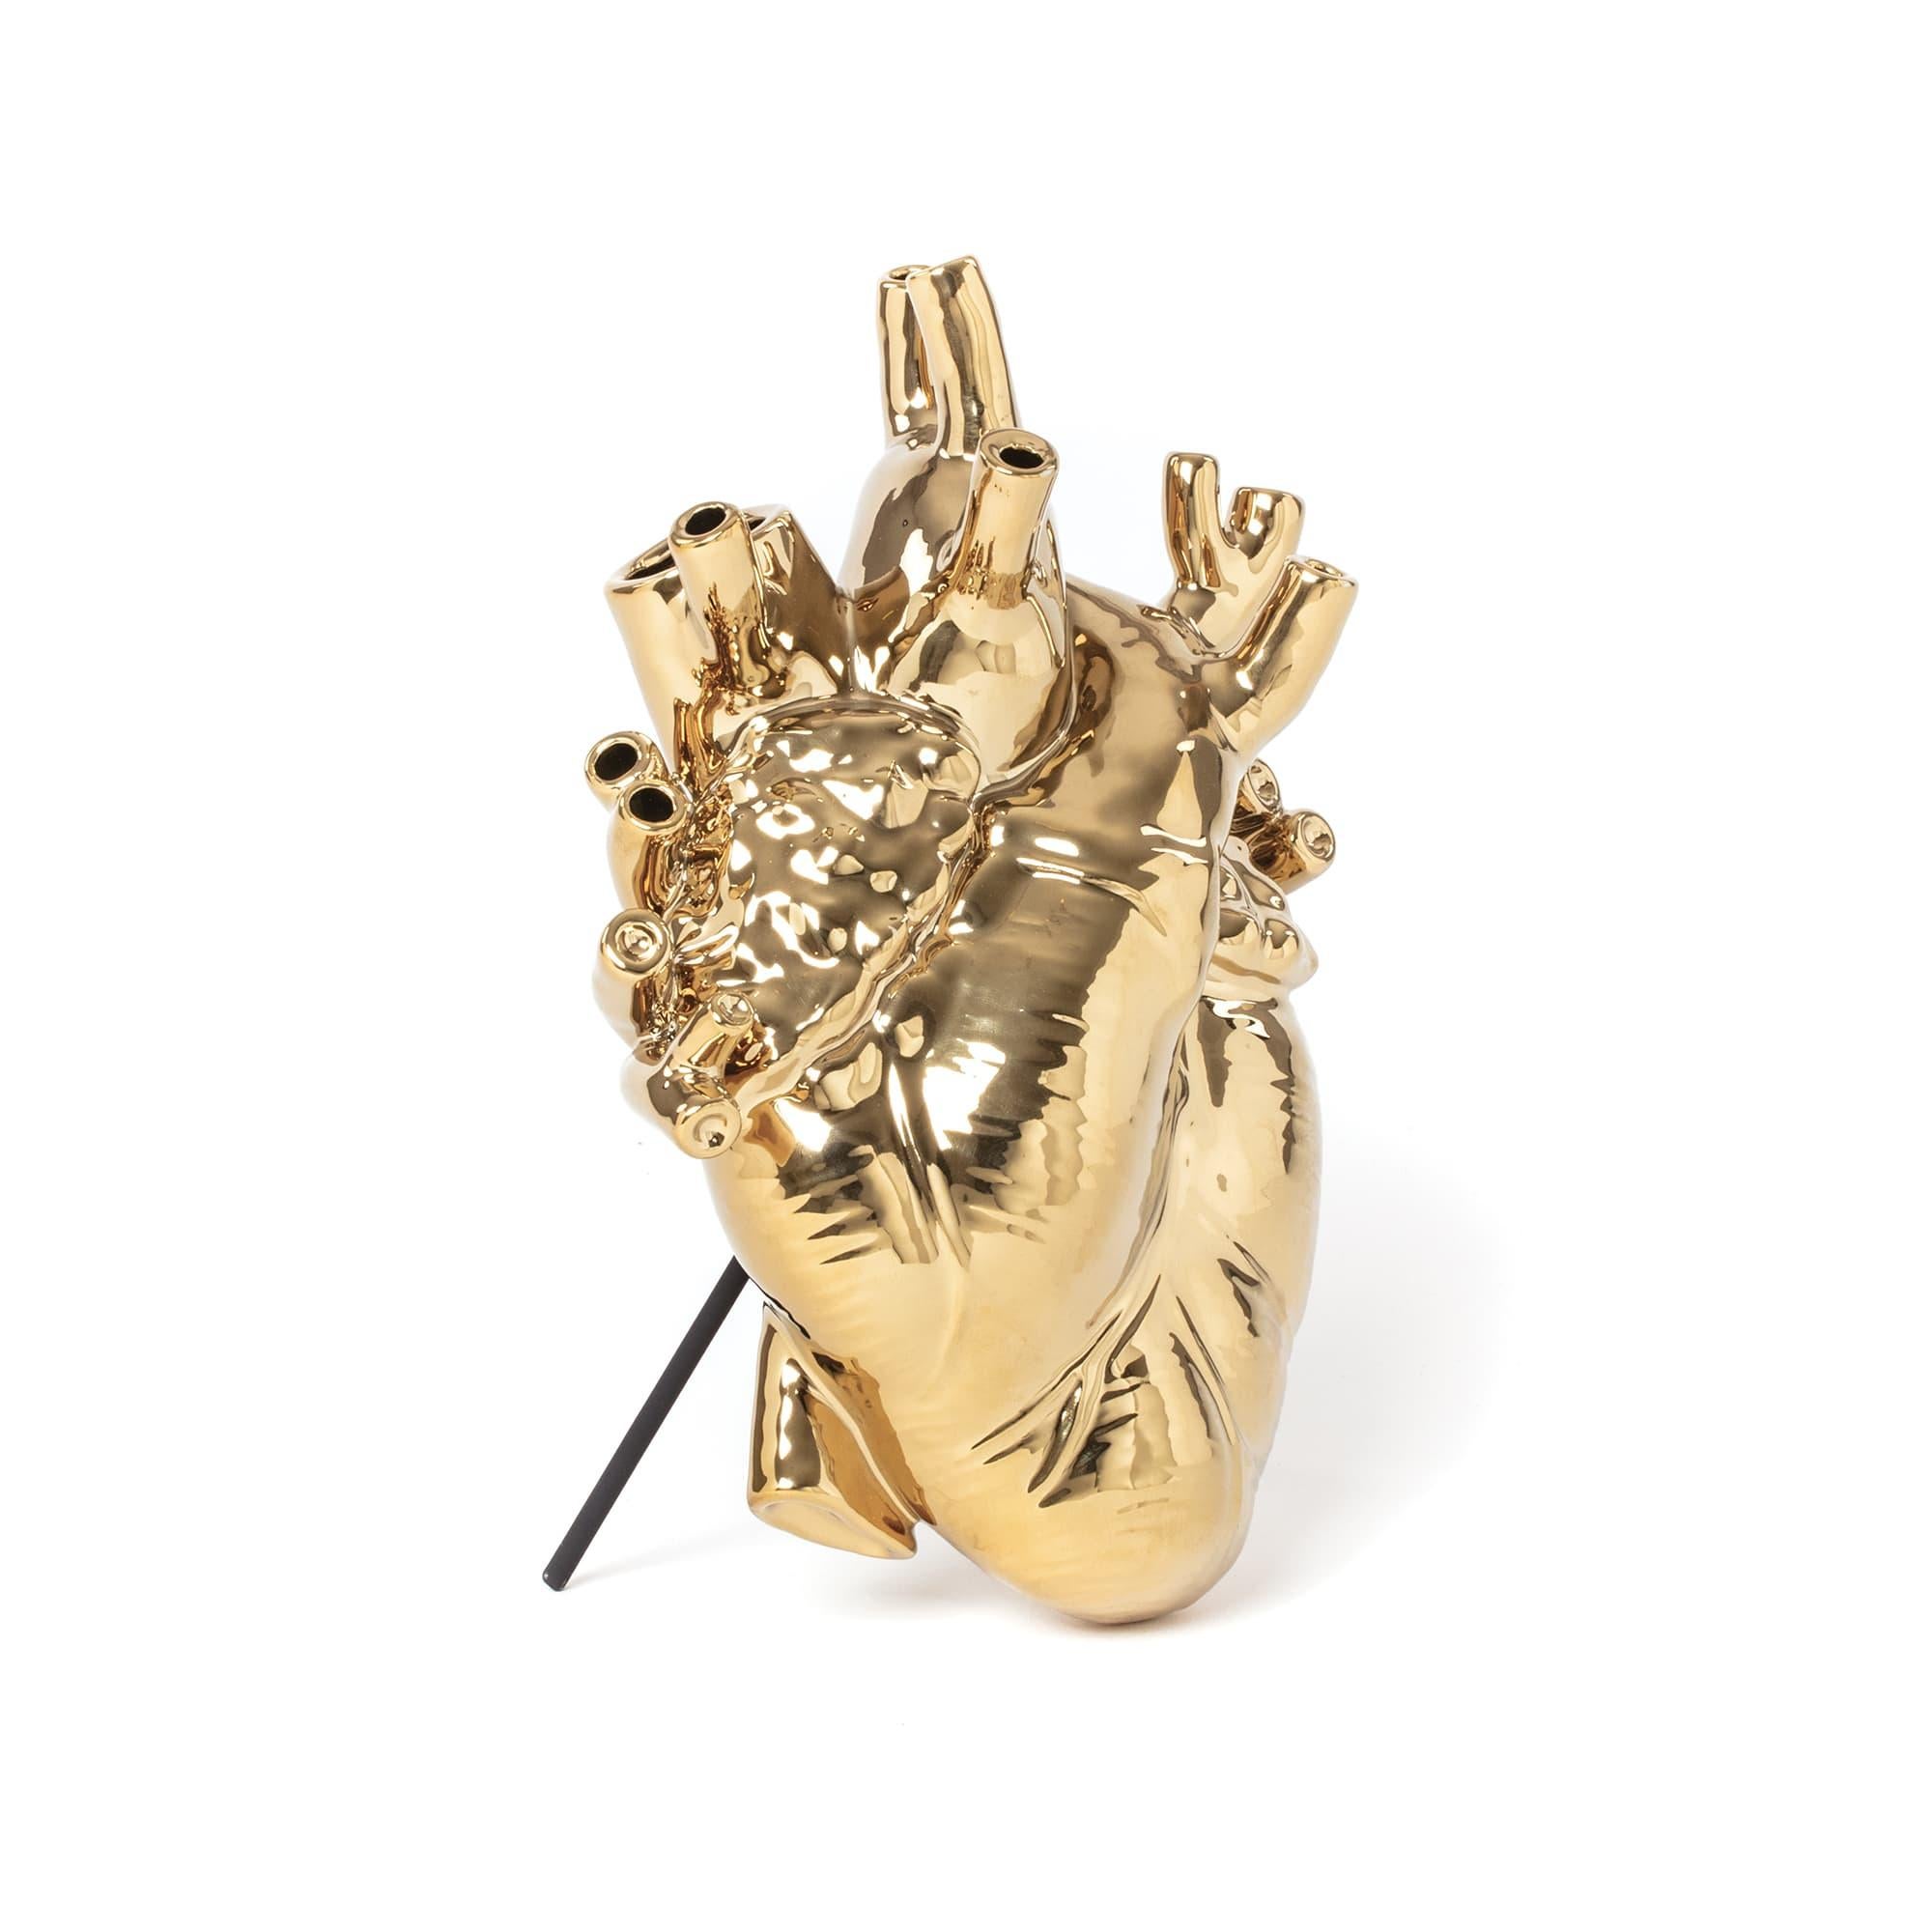 Seletti 'Love in Bloom' Gold Edition Heart Vase by Marcantonio In New Condition For Sale In Doral, FL